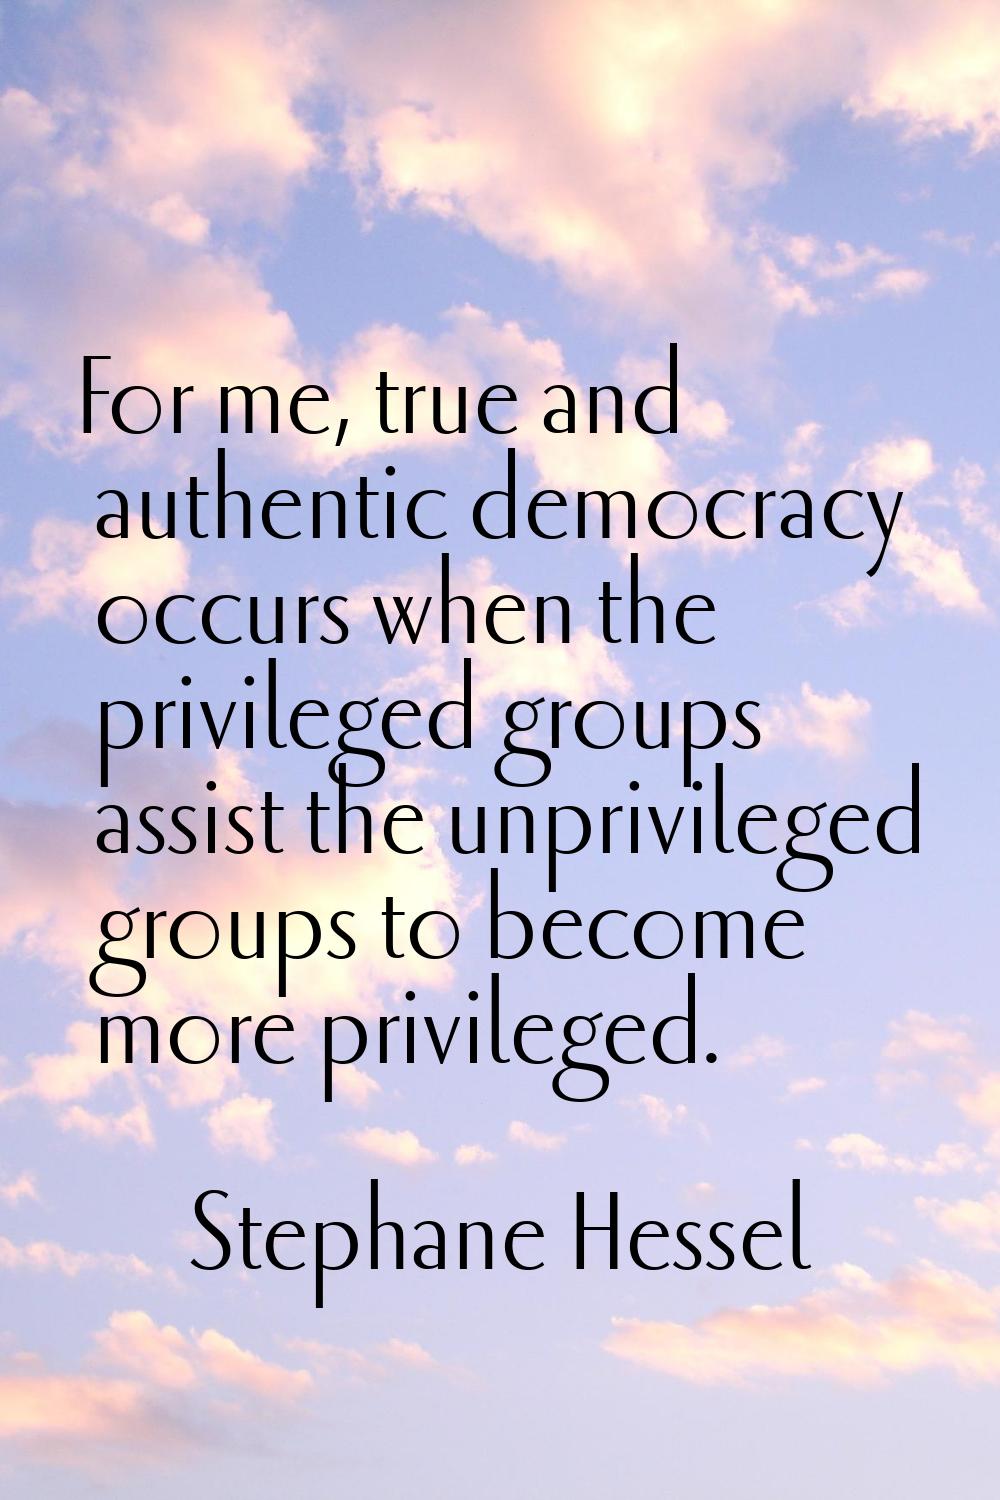 For me, true and authentic democracy occurs when the privileged groups assist the unprivileged grou